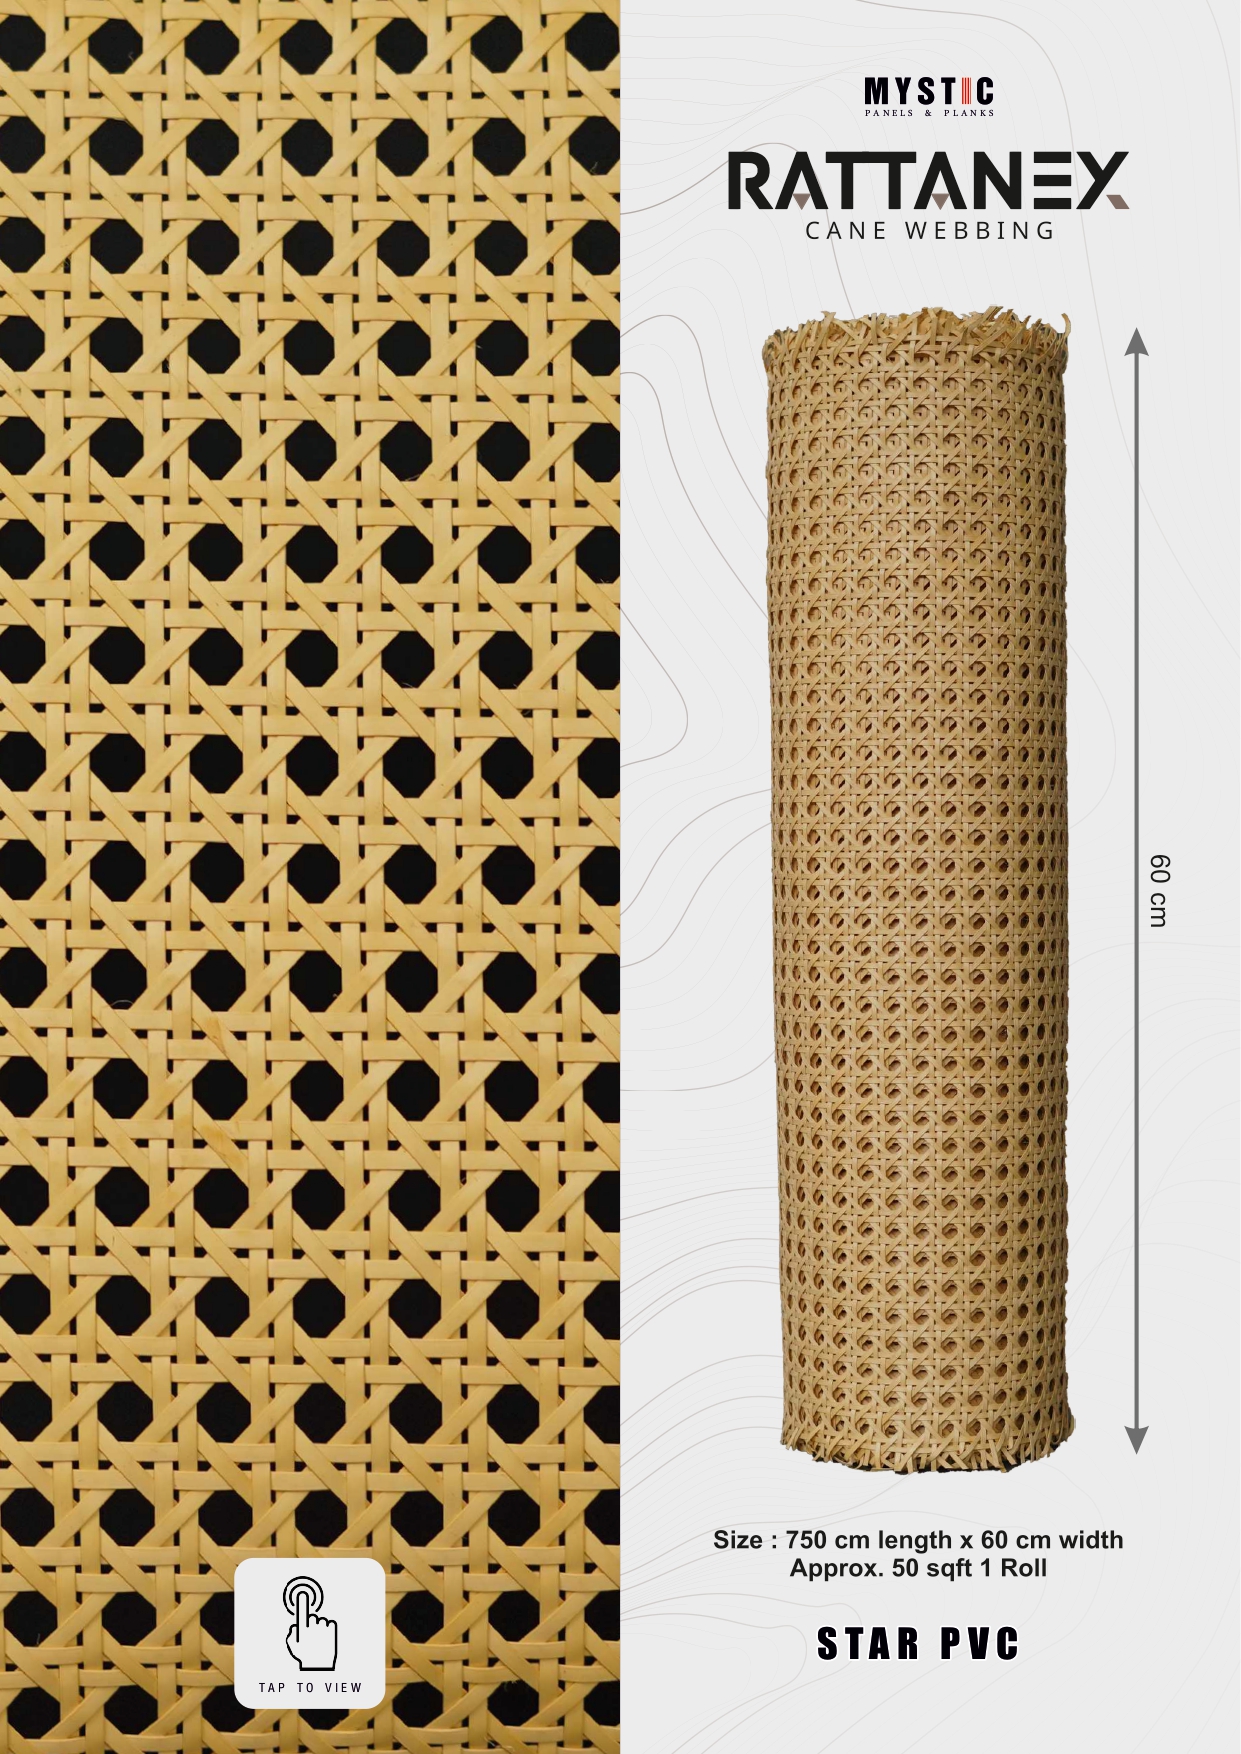 Handcrafted Rattan Cane Wall Paneling - Natural Elegance for Home Decor